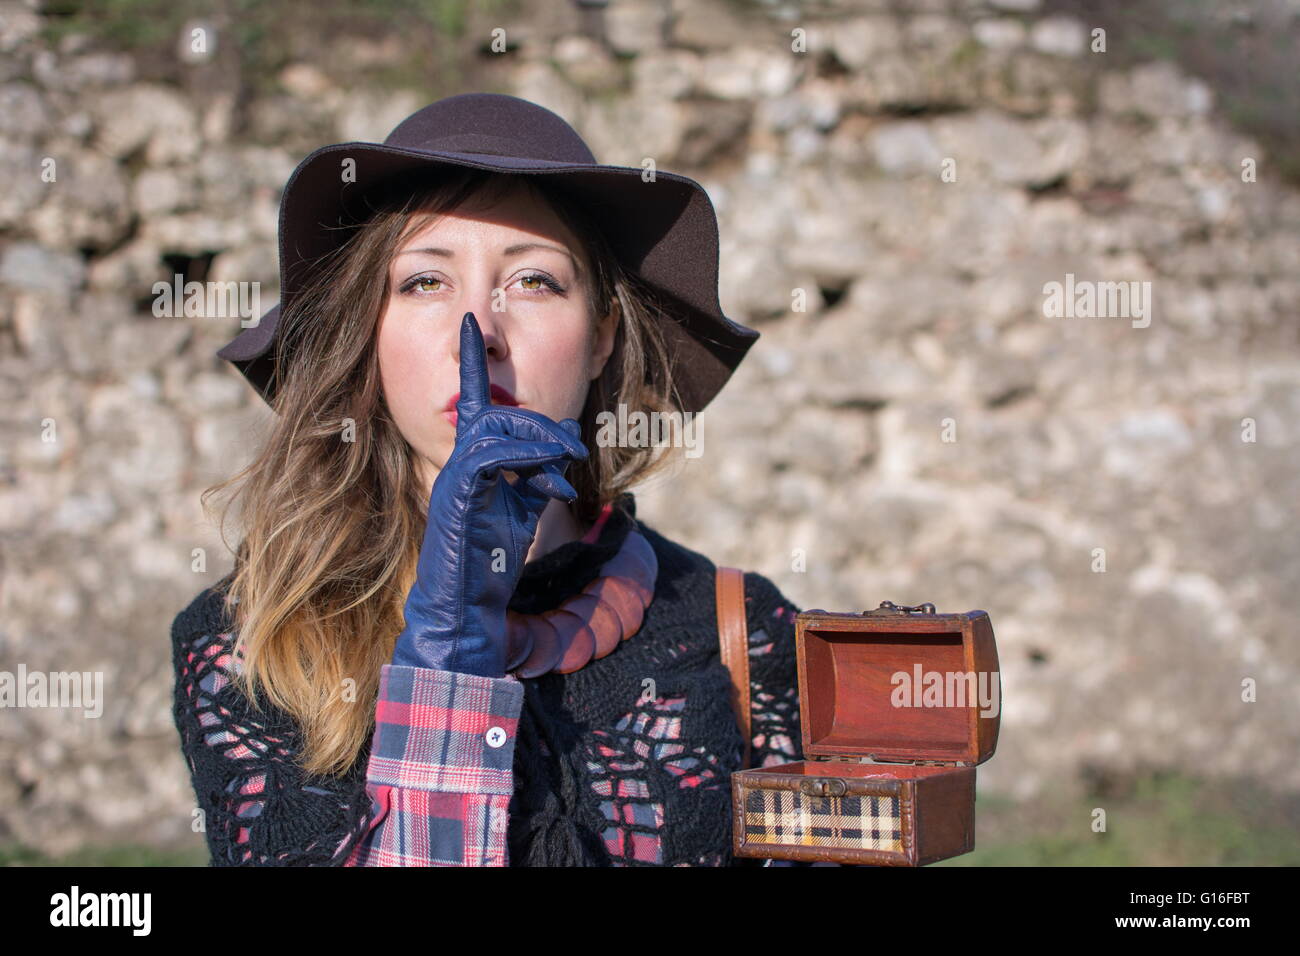 Mysterious young woman holding an old wooden box outdoors and demanding silence. Shhh! Stock Photo